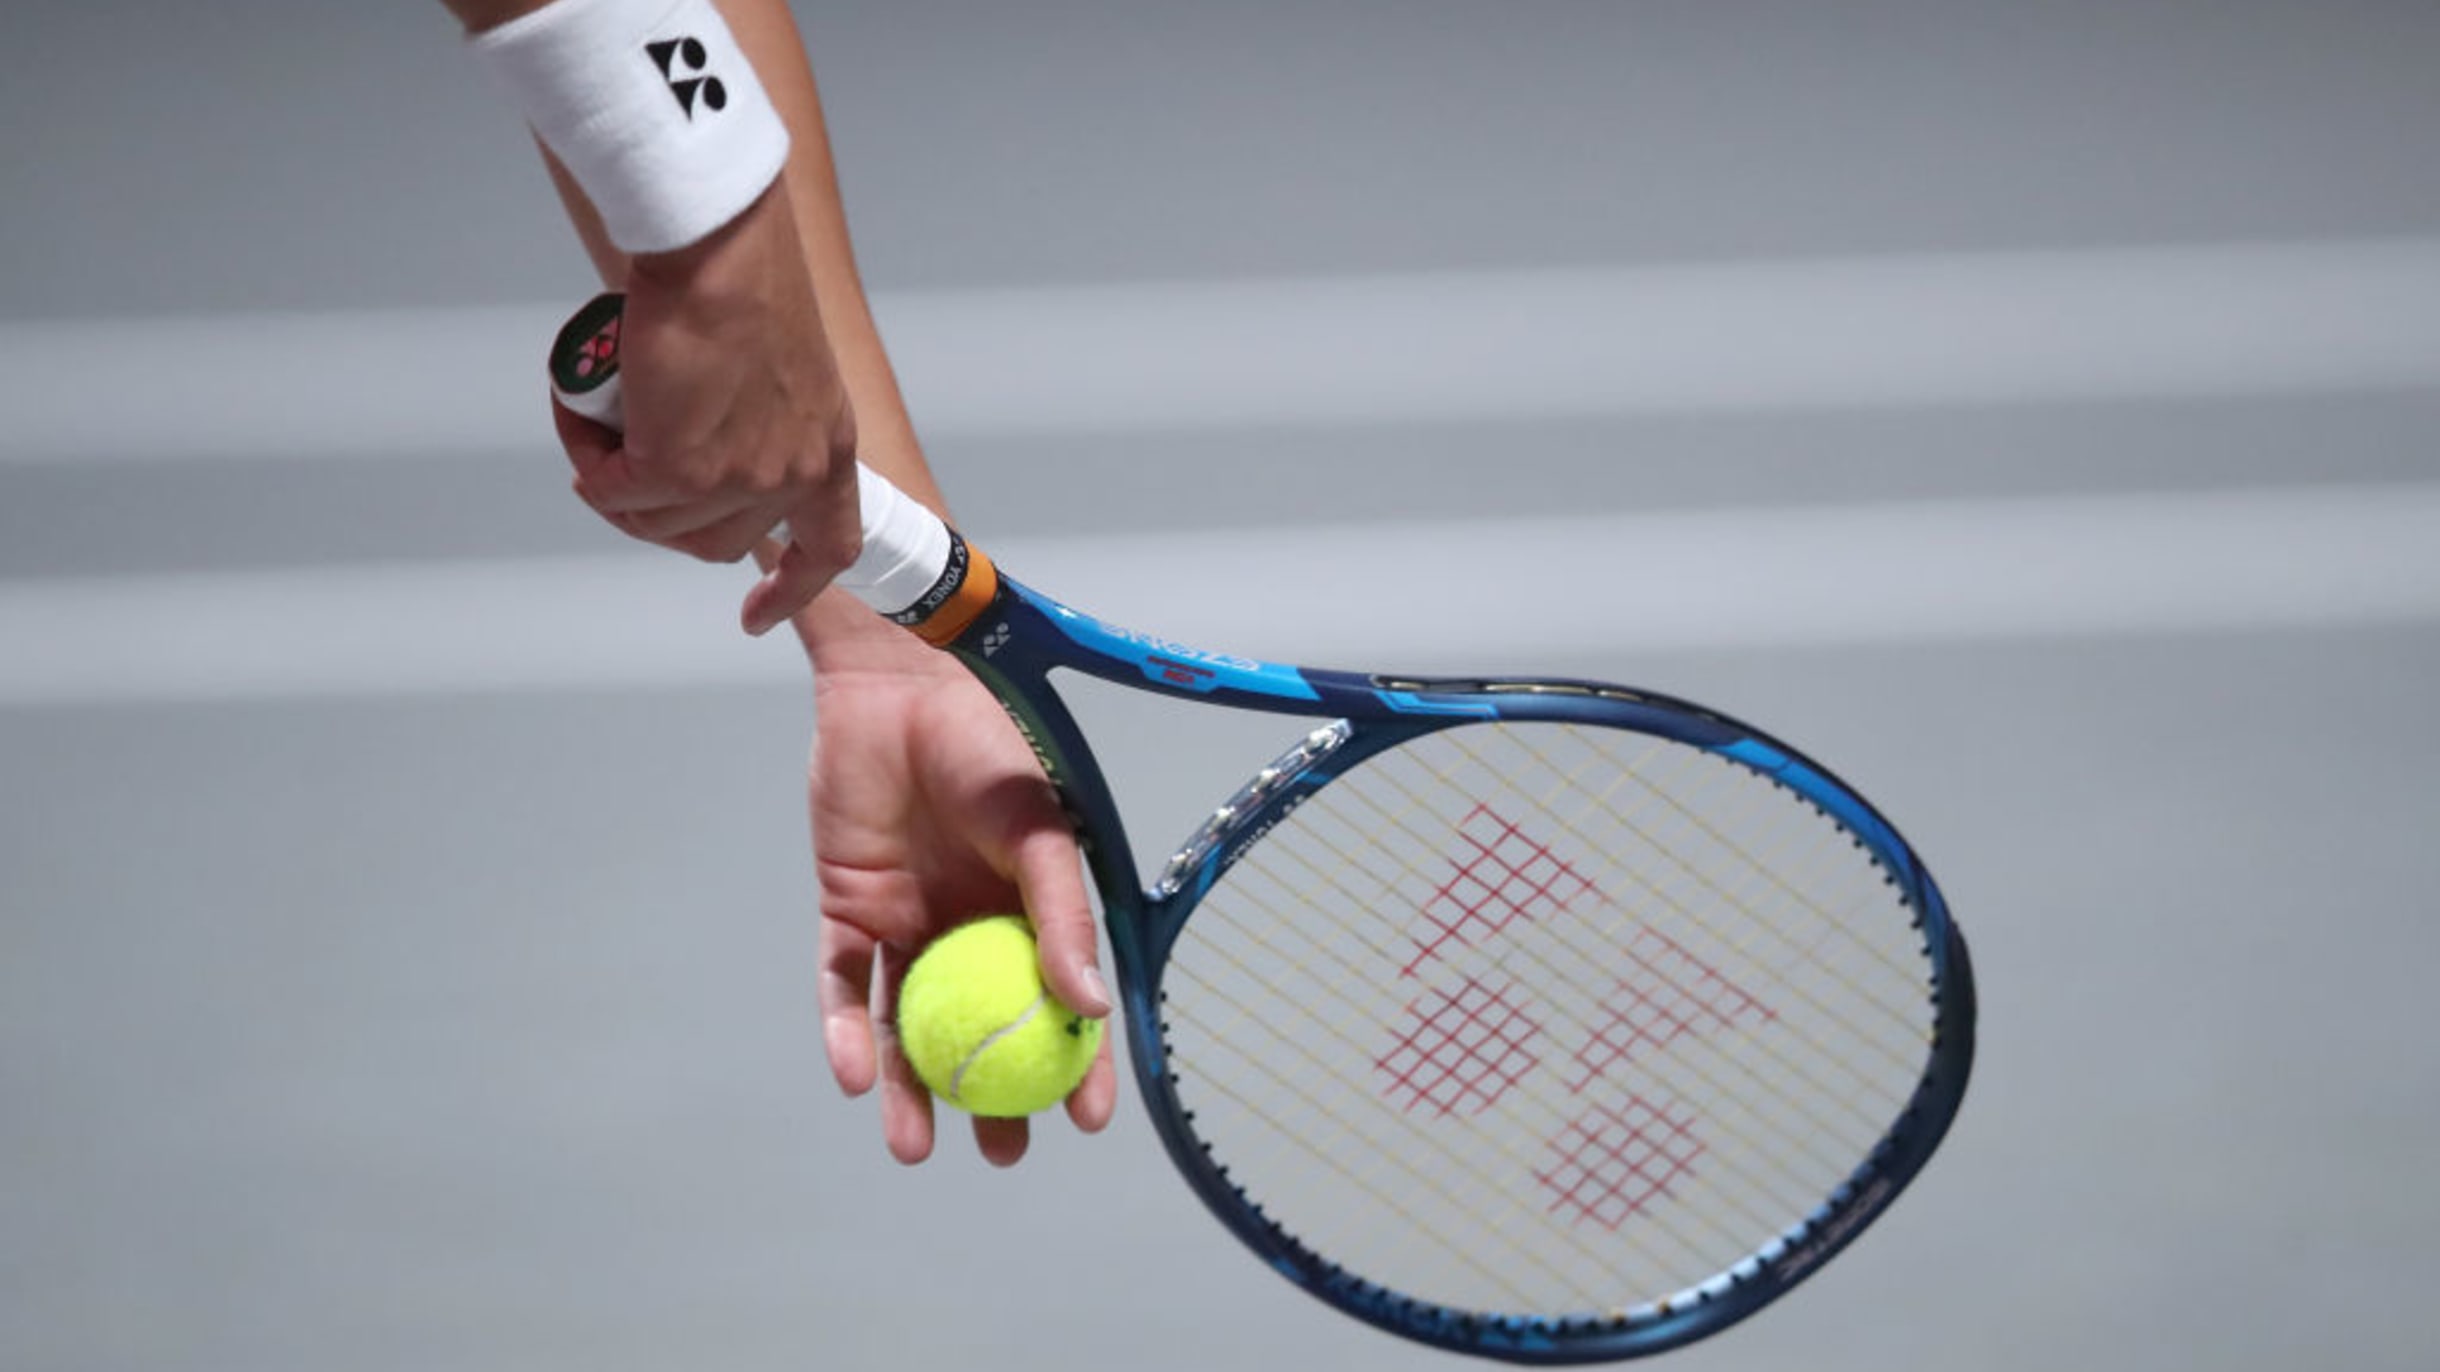 India to host four ATP Challenger tennis tournaments in 2023